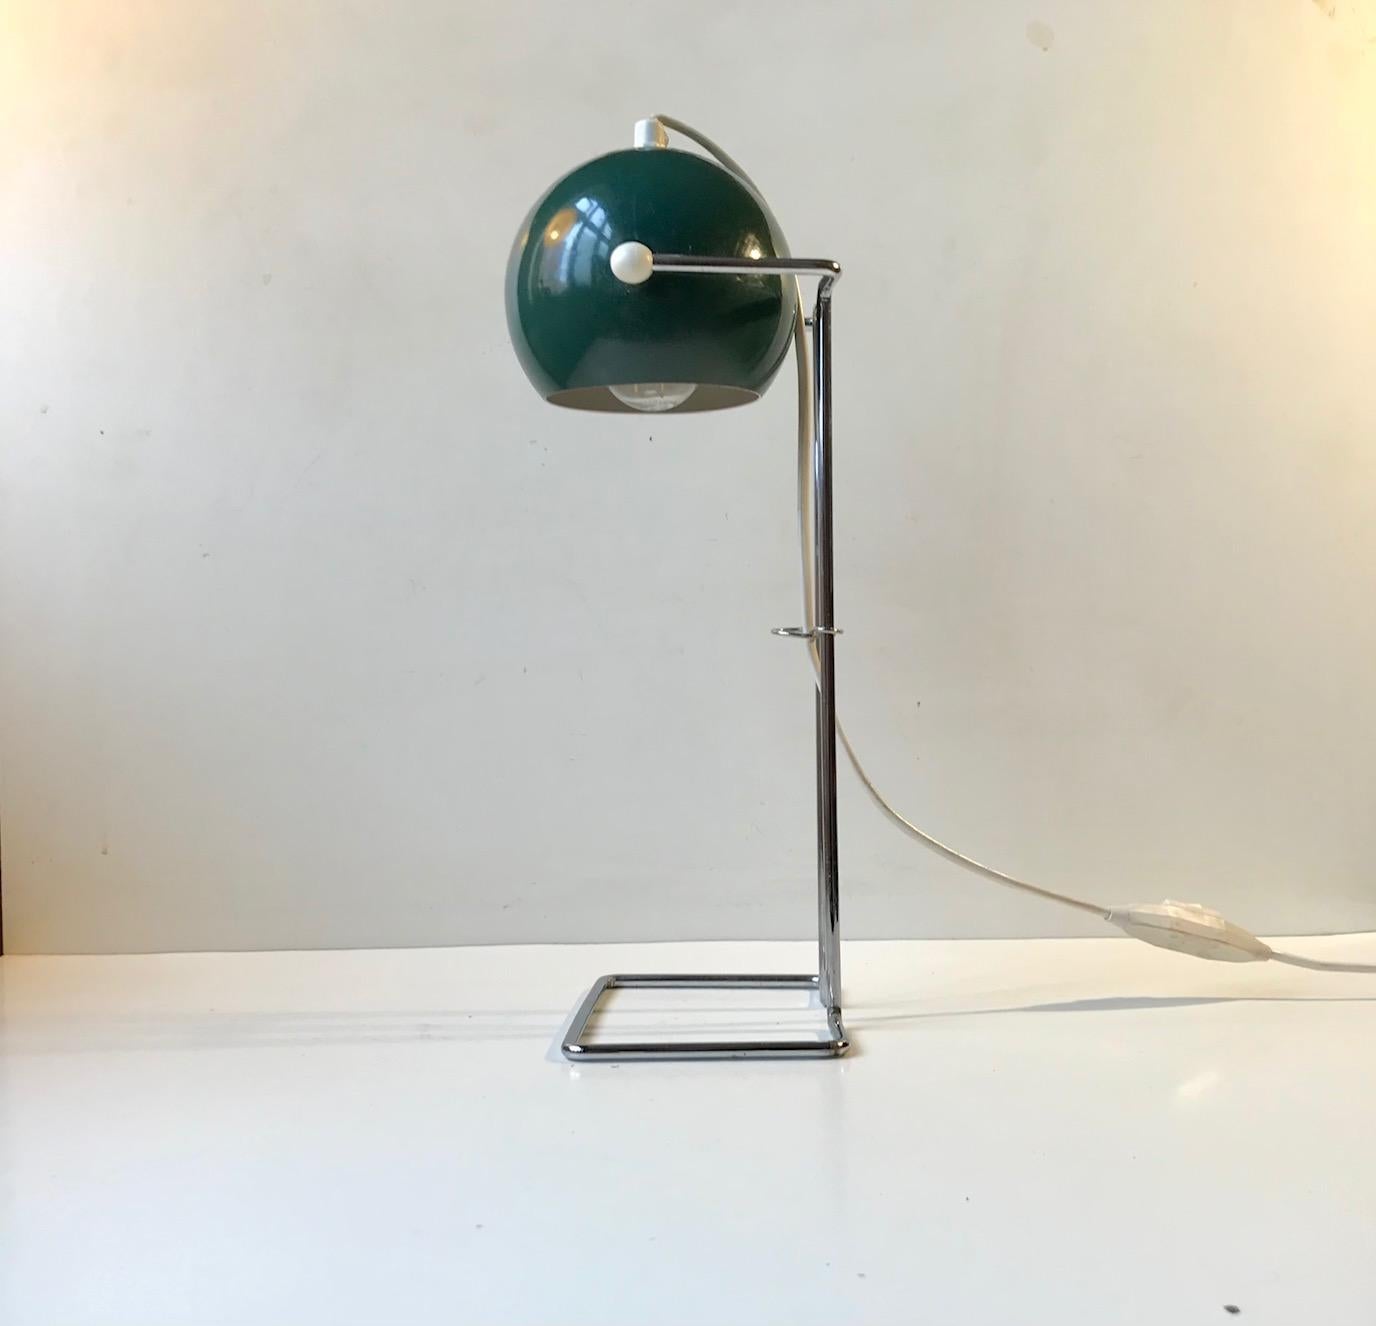 Rare grass green colored table light from E. S. Horn in Denmark. Designed and manufactured during the mid-late 1960s in a style reminiscent of Verner Panton. Its adjustable by the shade up/down, has a chrome plated steel string base, white